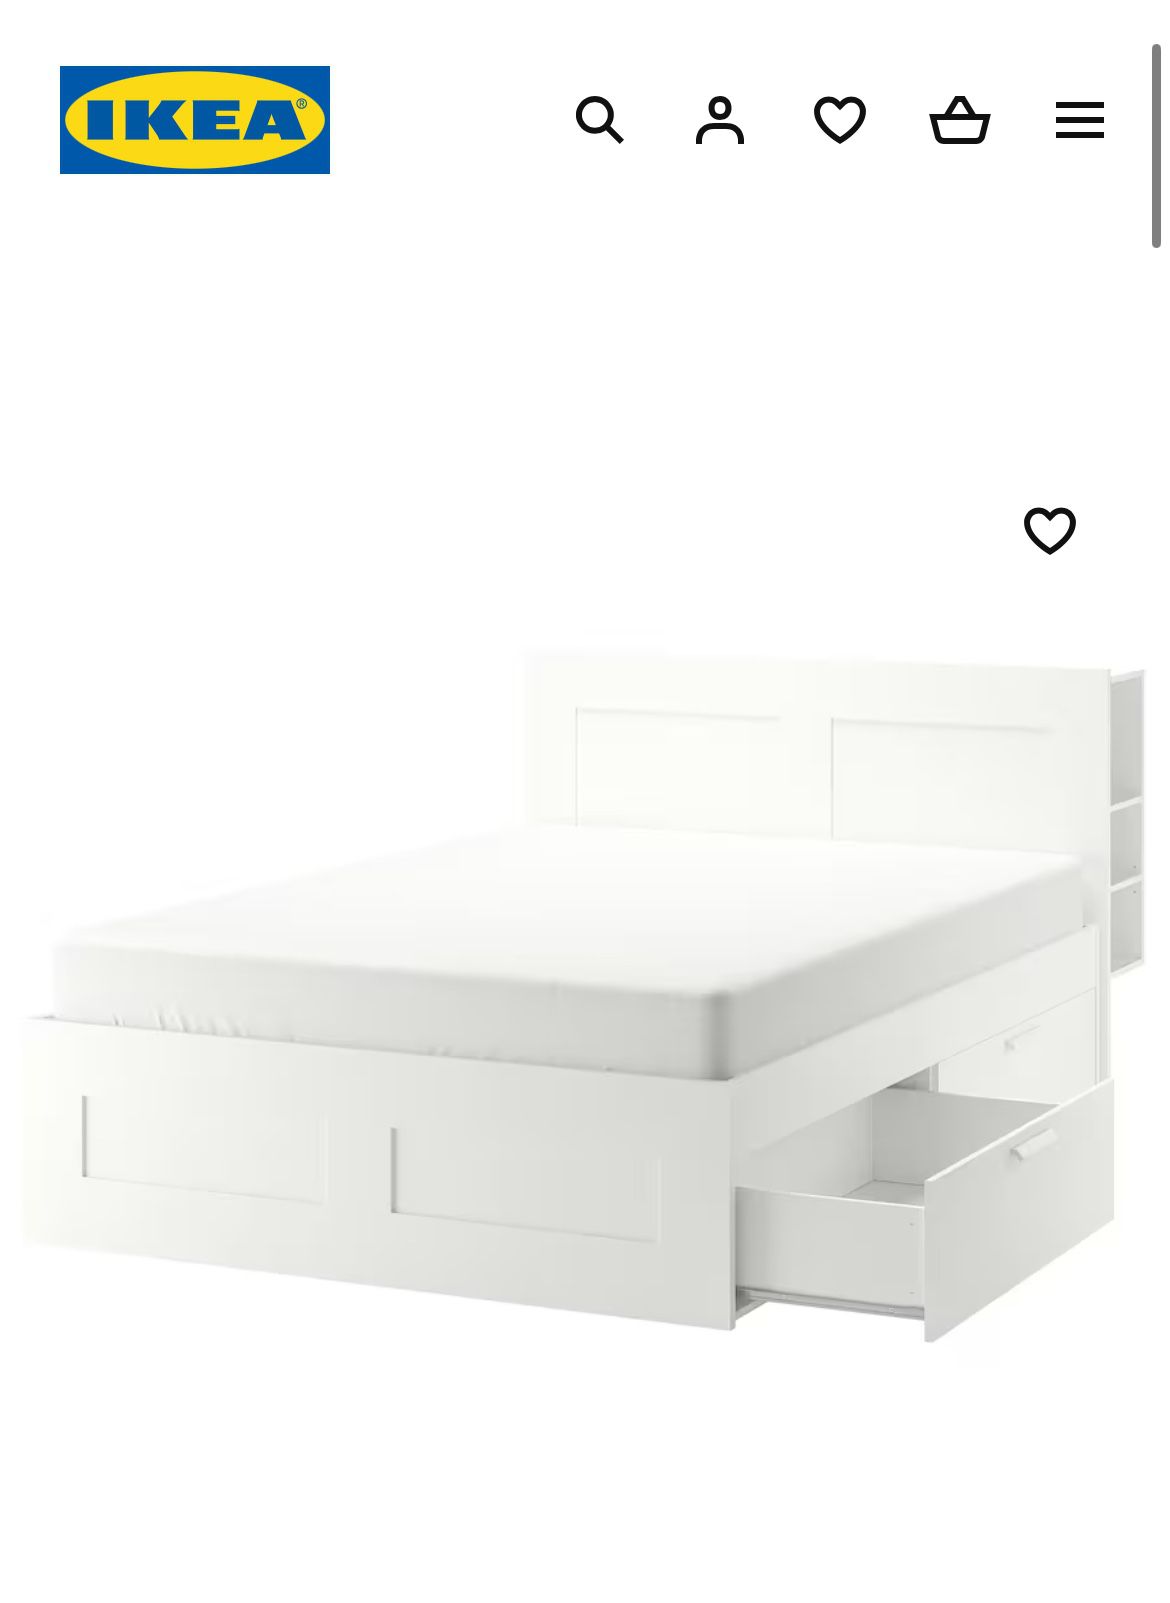 IKEA Bed Frame And Base (Queen) 